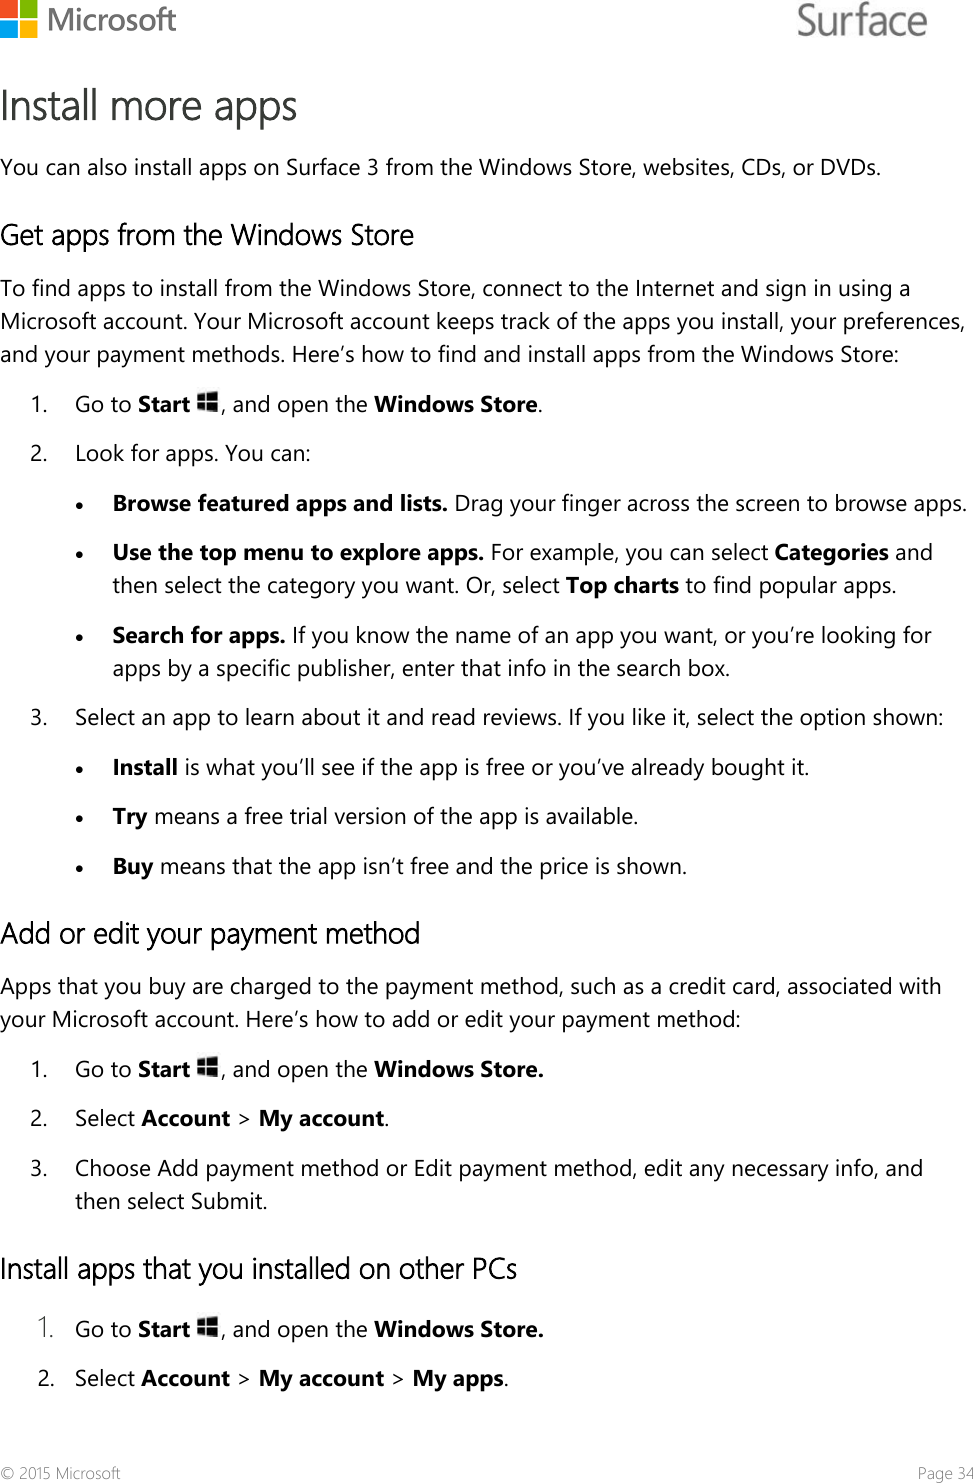    Install more apps You can also install apps on Surface 3 from the Windows Store, websites, CDs, or DVDs.  Get apps from the Windows Store To find apps to install from the Windows Store, connect to the Internet and sign in using a Microsoft account. Your Microsoft account keeps track of the apps you install, your preferences, and your payment methods. Here’s how to find and install apps from the Windows Store: 1. Go to Start , and open the Windows Store.  2. Look for apps. You can:  • Browse featured apps and lists. Drag your finger across the screen to browse apps.   • Use the top menu to explore apps. For example, you can select Categories and then select the category you want. Or, select Top charts to find popular apps.  • Search for apps. If you know the name of an app you want, or you’re looking for apps by a specific publisher, enter that info in the search box.  3. Select an app to learn about it and read reviews. If you like it, select the option shown: • Install is what you’ll see if the app is free or you’ve already bought it. • Try means a free trial version of the app is available.  • Buy means that the app isn’t free and the price is shown.  Add or edit your payment method  Apps that you buy are charged to the payment method, such as a credit card, associated with your Microsoft account. Here’s how to add or edit your payment method: 1. Go to Start , and open the Windows Store. 2. Select Account &gt; My account. 3. Choose Add payment method or Edit payment method, edit any necessary info, and then select Submit. Install apps that you installed on other PCs 1. Go to Start , and open the Windows Store. 2. Select Account &gt; My account &gt; My apps. © 2015 Microsoft    Page 34 